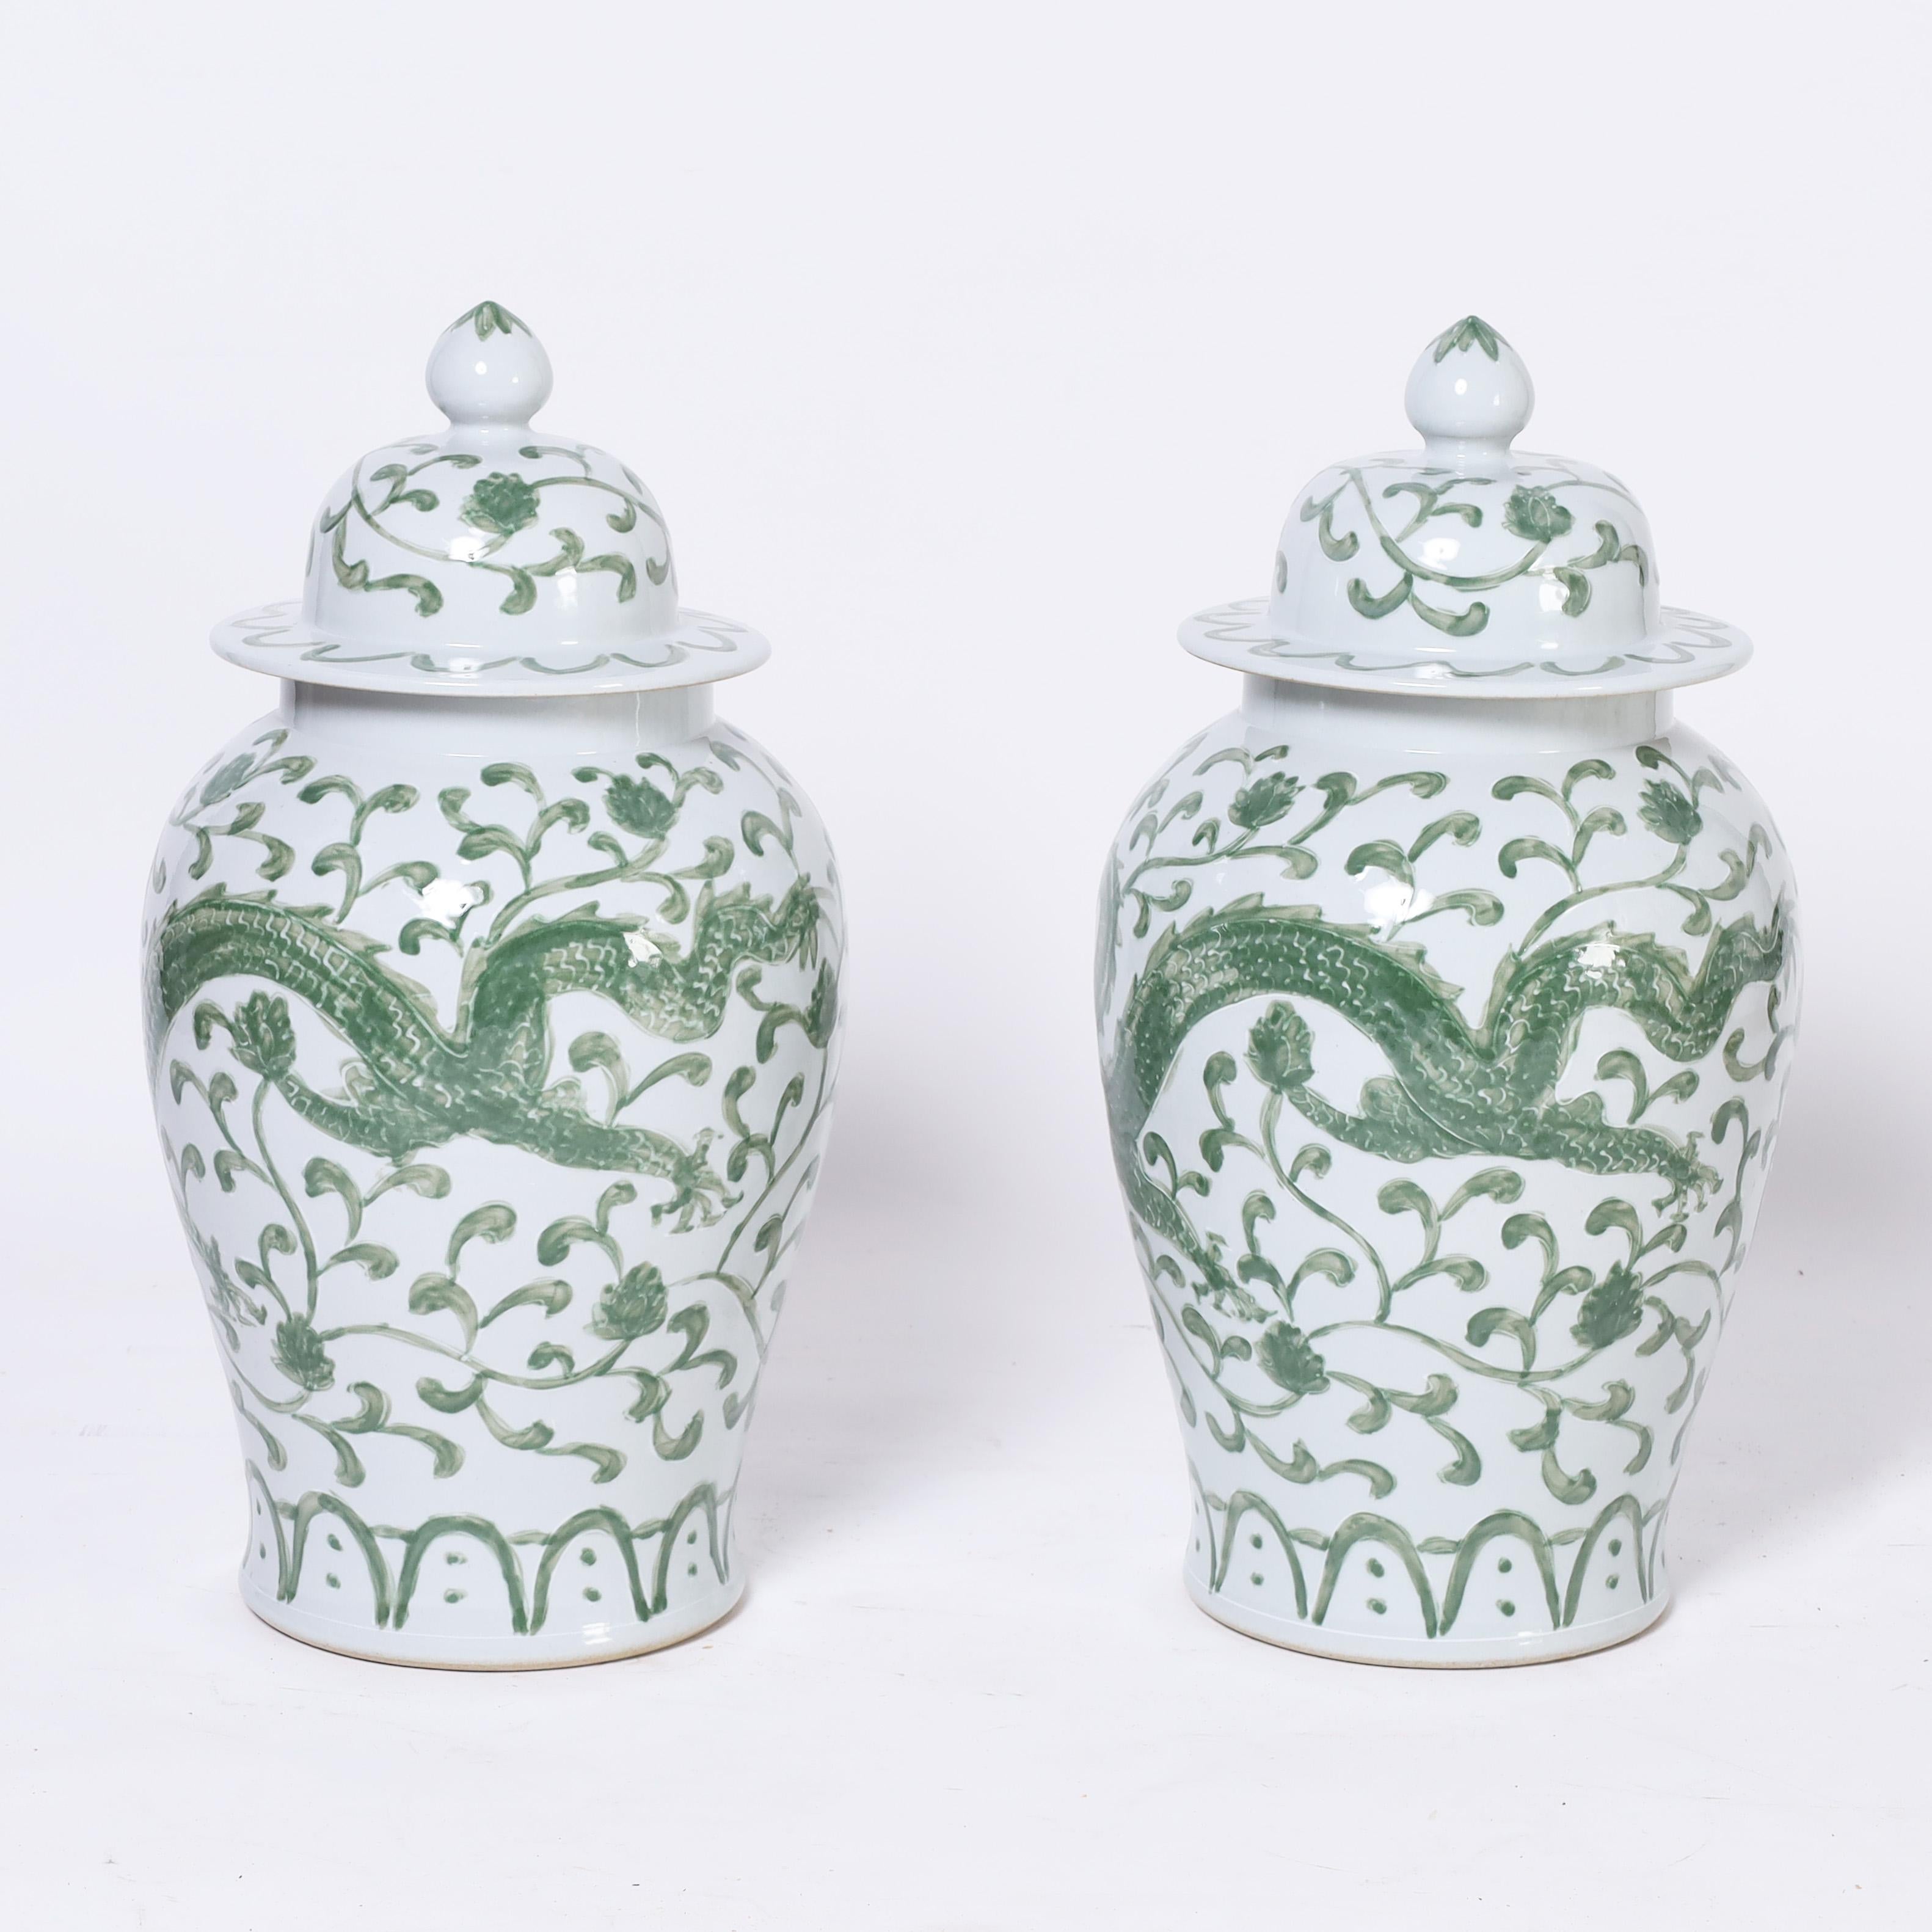 Striking pair of Chinese porcelain lidded jars handcrafted in classic form and hand decorated with dragons in a floral field. 